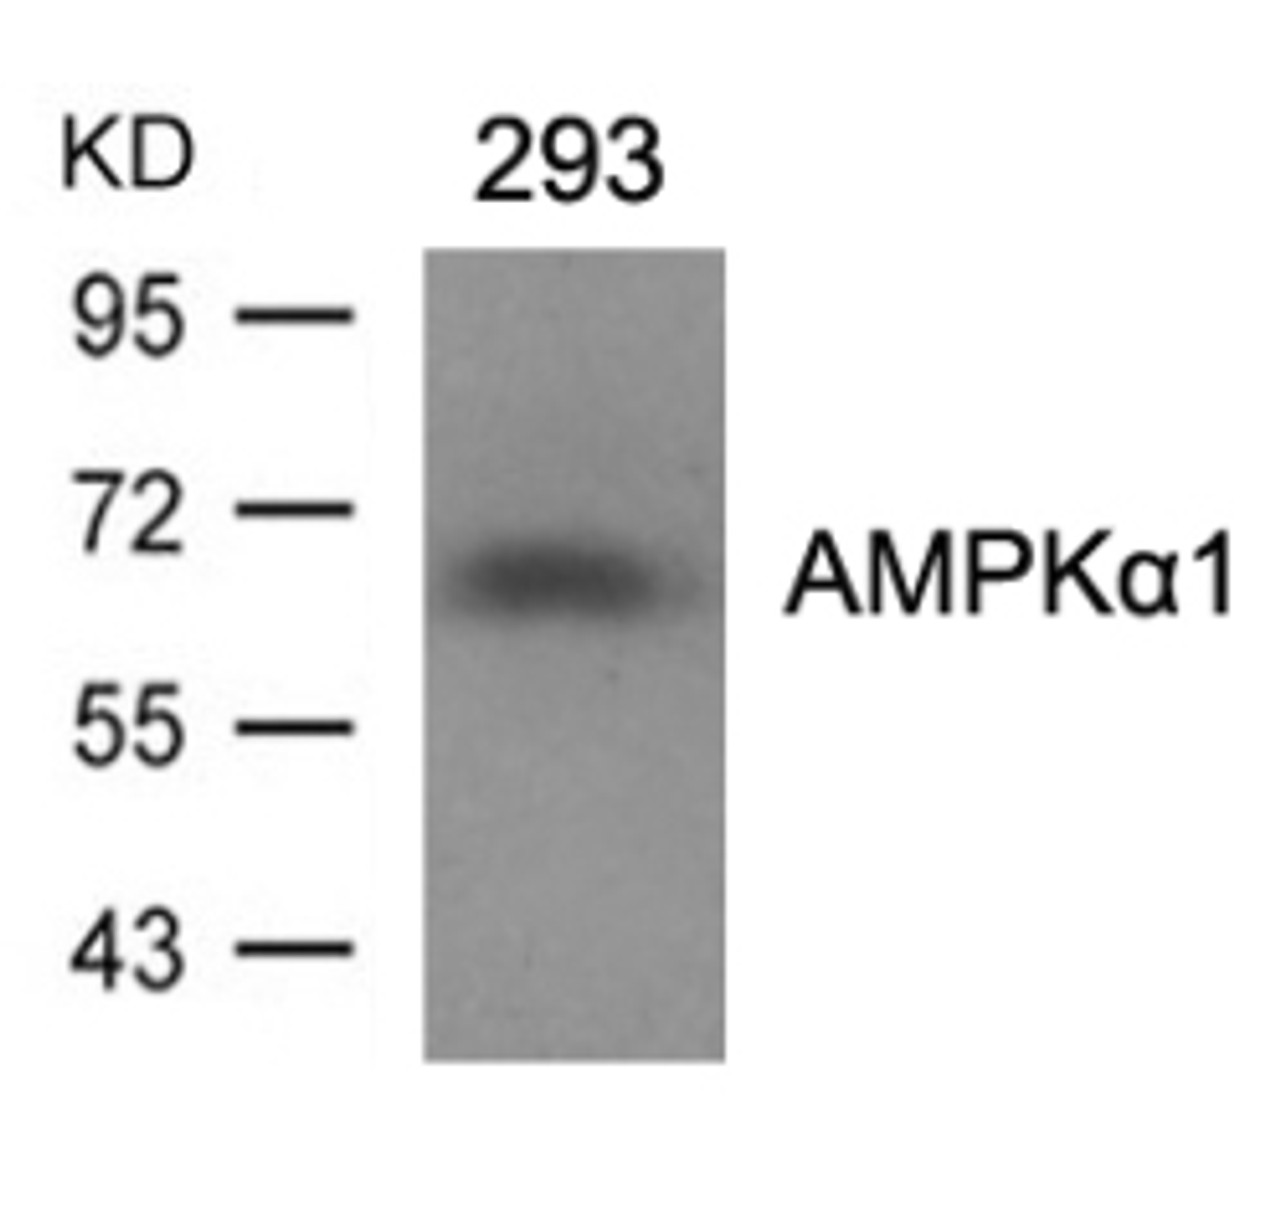 Western blot analysis of lysed extracts from 293 cells using AMPK&#945;1 (Ab-487) Antibody.